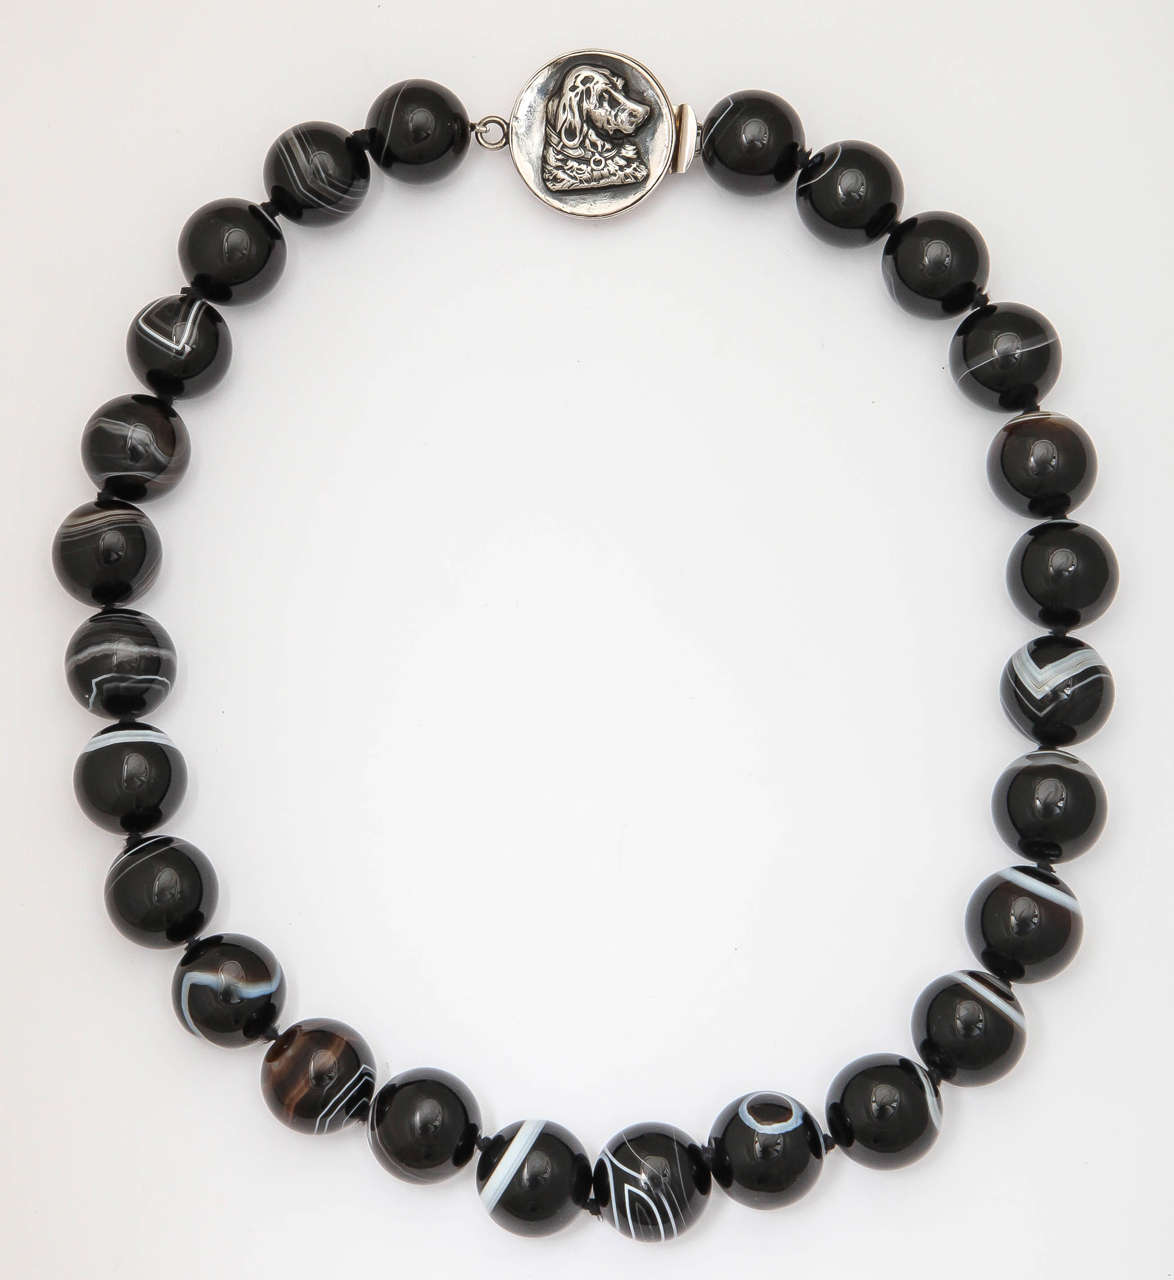 Large striped Agate Beads - victorian - combined wit an antique associated Sterling Silver clasp of a dog in profile.